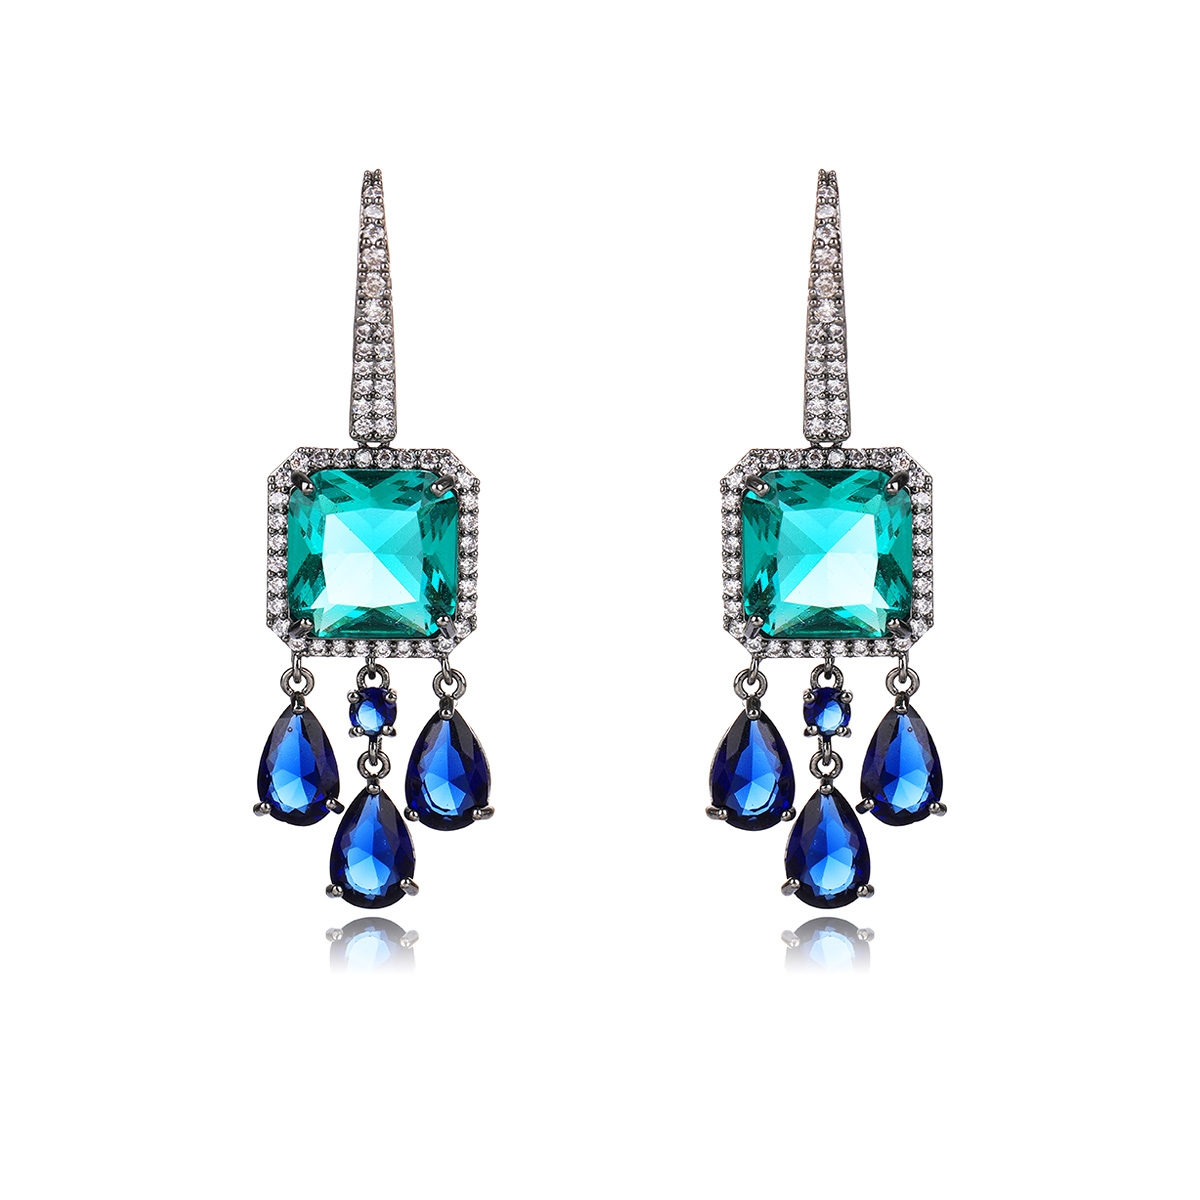 Irresistible Blue Cubic Zirconia Dangle Earrings For Your Occasions